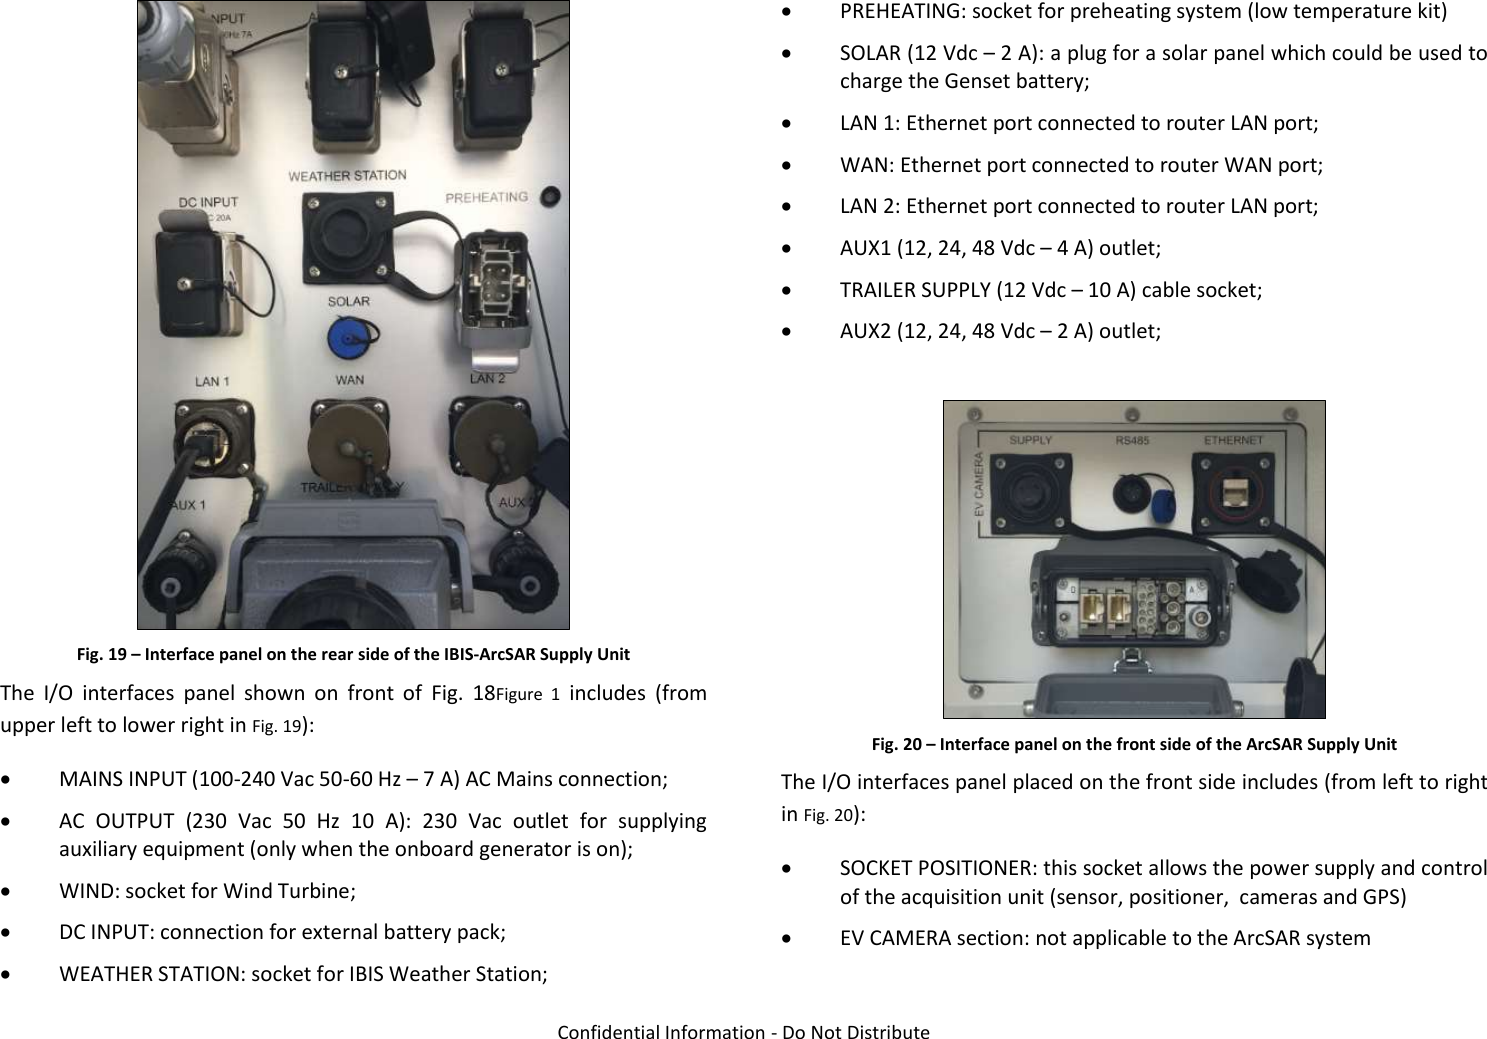   Confidential Information - Do Not Distribute  Fig. 19 – Interface panel on the rear side of the IBIS-ArcSAR Supply Unit The  I/O  interfaces  panel  shown  on  front  of  Fig.  18Figure  1  includes  (from upper left to lower right in Fig. 19):  MAINS INPUT (100-240 Vac 50-60 Hz – 7 A) AC Mains connection;  AC  OUTPUT  (230  Vac  50  Hz  10  A):  230  Vac  outlet  for  supplying auxiliary equipment (only when the onboard generator is on);  WIND: socket for Wind Turbine;  DC INPUT: connection for external battery pack;  WEATHER STATION: socket for IBIS Weather Station;  PREHEATING: socket for preheating system (low temperature kit)  SOLAR (12 Vdc – 2 A): a plug for a solar panel which could be used to charge the Genset battery;  LAN 1: Ethernet port connected to router LAN port;  WAN: Ethernet port connected to router WAN port;  LAN 2: Ethernet port connected to router LAN port;  AUX1 (12, 24, 48 Vdc – 4 A) outlet;  TRAILER SUPPLY (12 Vdc – 10 A) cable socket;  AUX2 (12, 24, 48 Vdc – 2 A) outlet;   Fig. 20 – Interface panel on the front side of the ArcSAR Supply Unit The I/O interfaces panel placed on the front side includes (from left to right in Fig. 20):  SOCKET POSITIONER: this socket allows the power supply and control of the acquisition unit (sensor, positioner,  cameras and GPS)  EV CAMERA section: not applicable to the ArcSAR system 